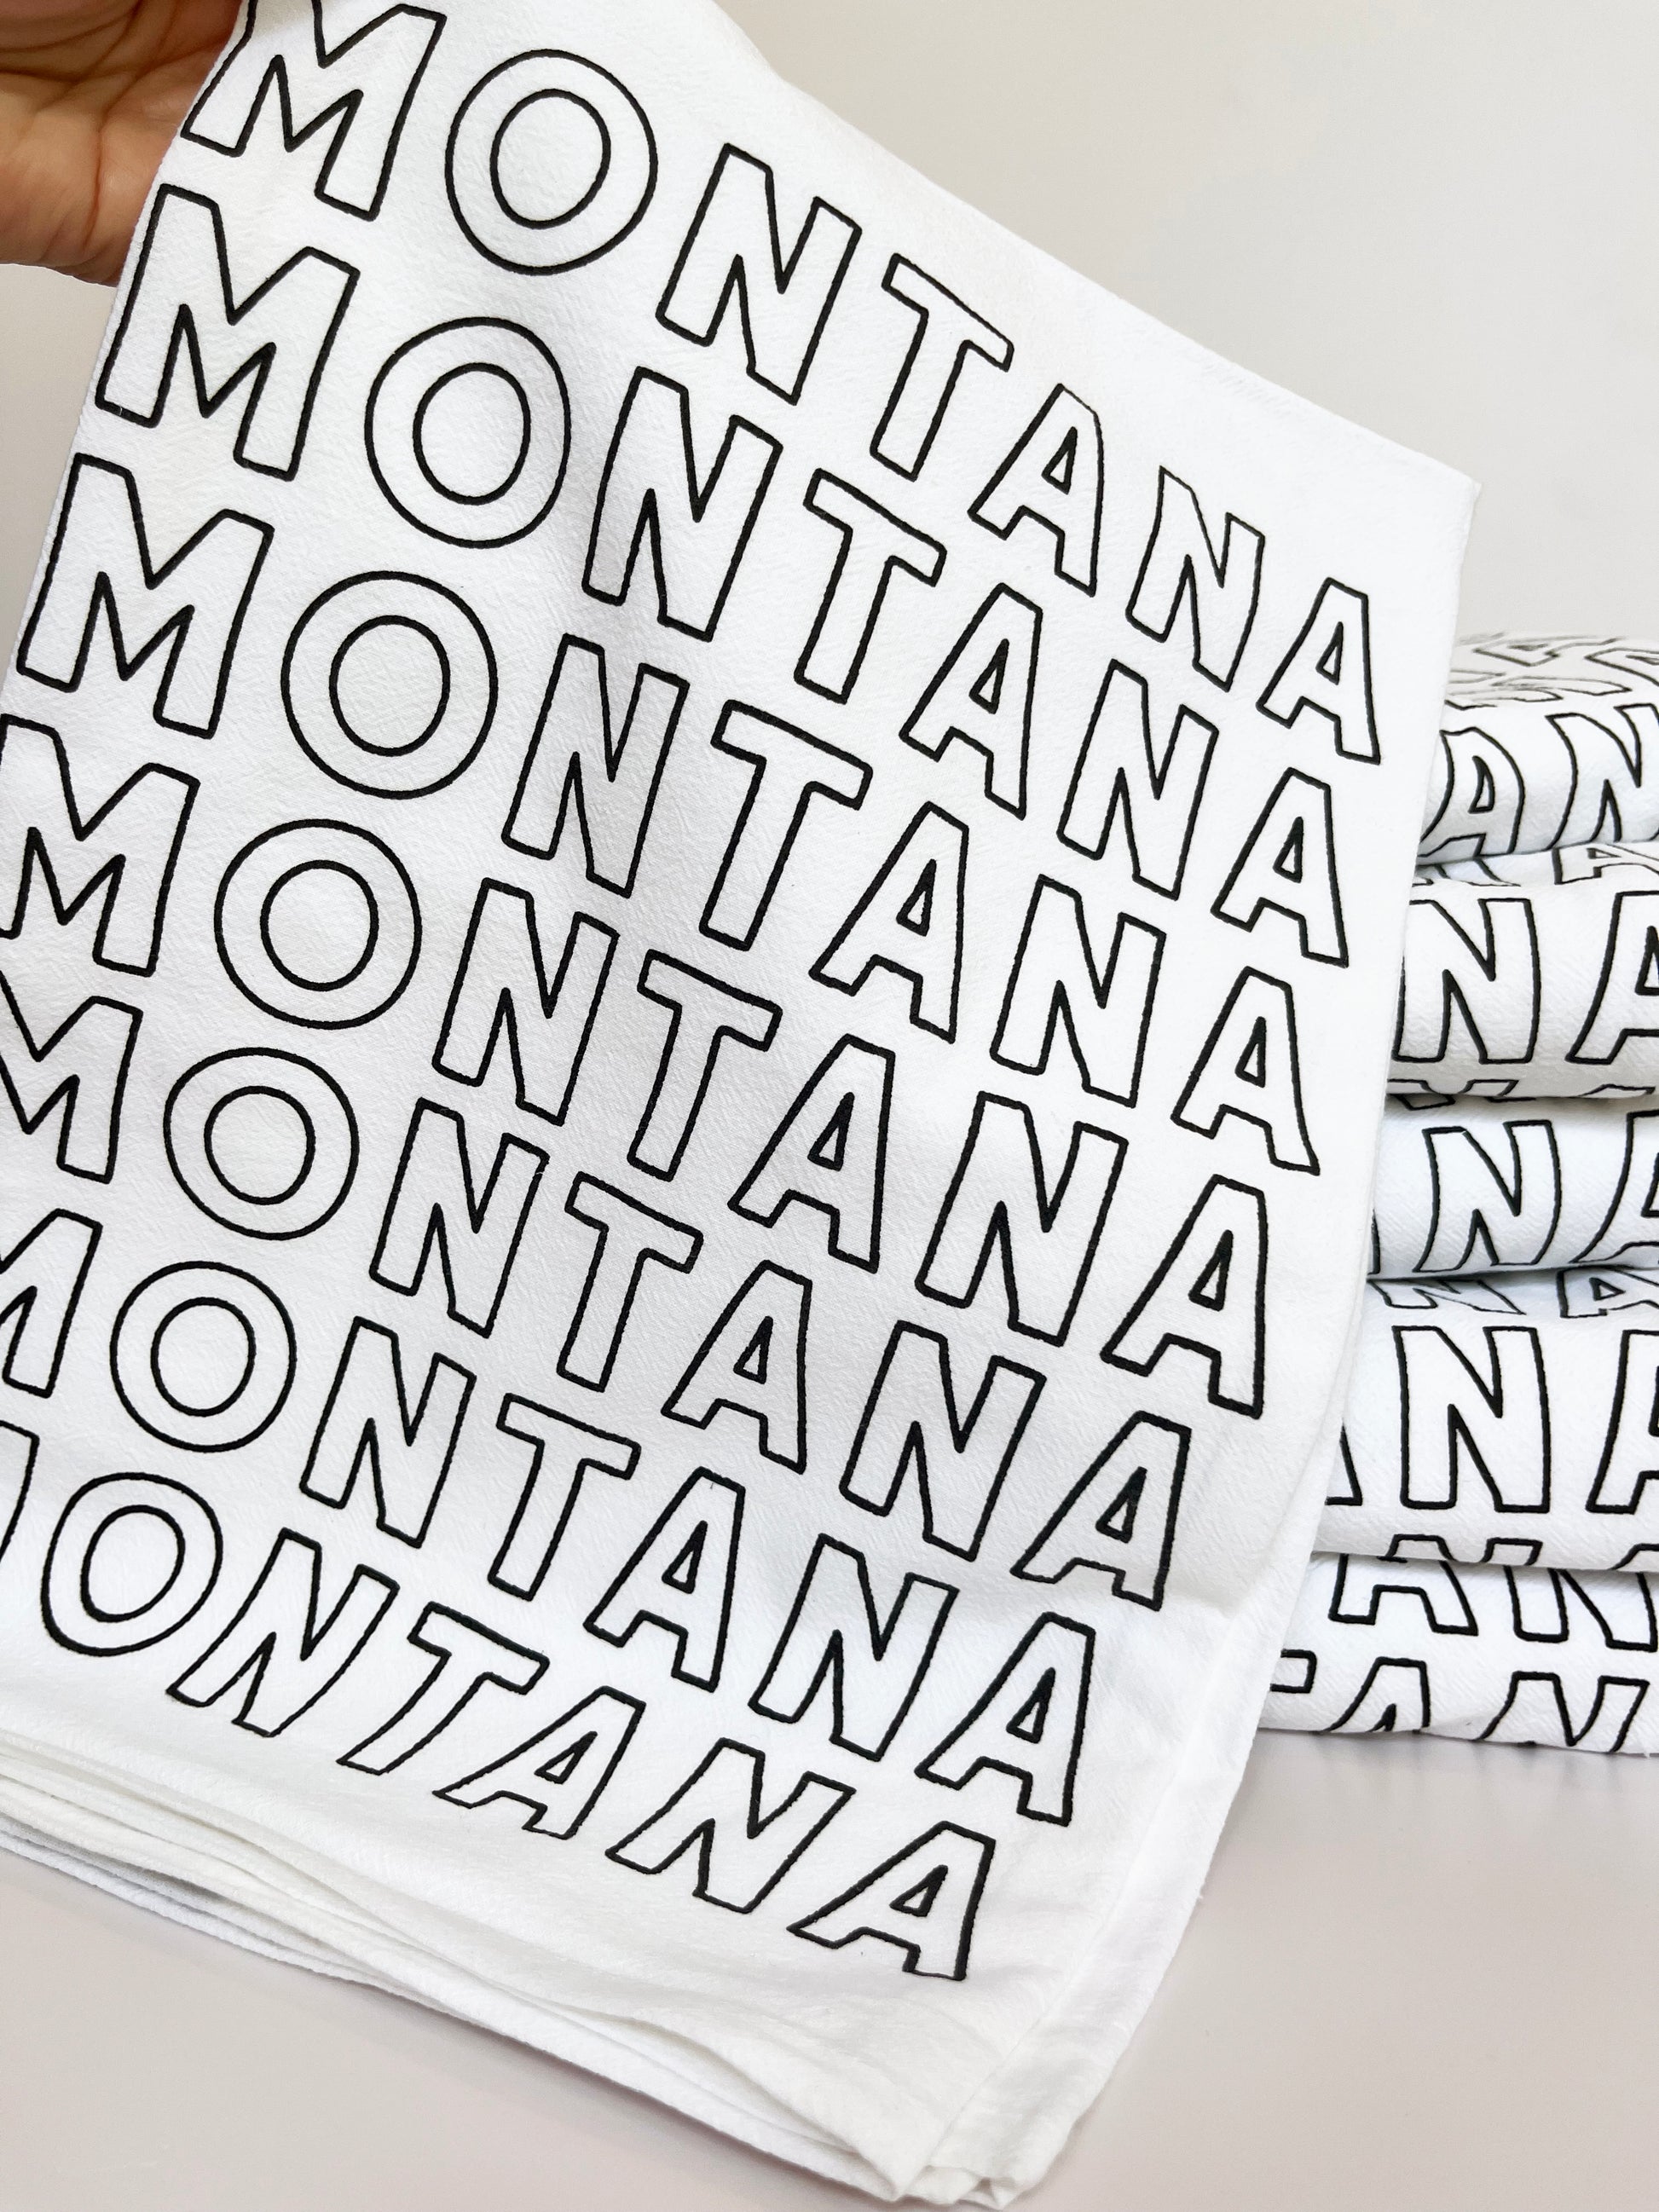 montana typography screen printed cotton kitchen towel montana written in outlined letters montana souvenir big sky bozeman missoula helena billings yellowstone glacier national park coin laundry fun cotton screen printed tea towels  